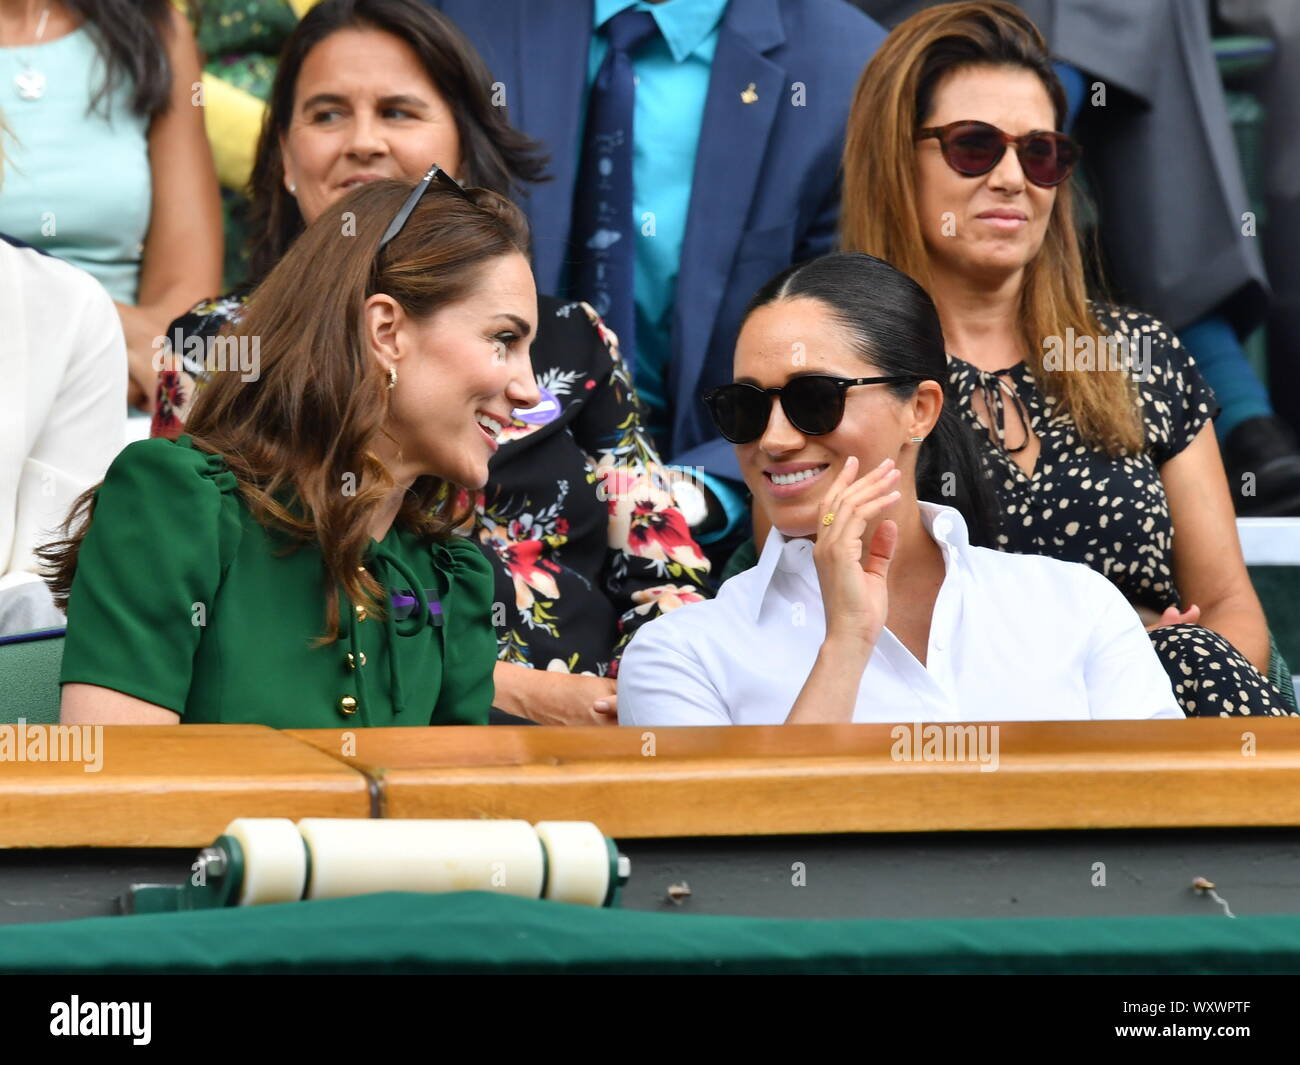 Catherine, Duchess of Cambridge, Meghan, Duchess of Sussex, Pippa Middleton in the Royal Box on Centre Court during day twelve of the Wimbledon Tennis Championships at All England Lawn Tennis and Croquet Club on July 13, 2019 in London, England. Stock Photo